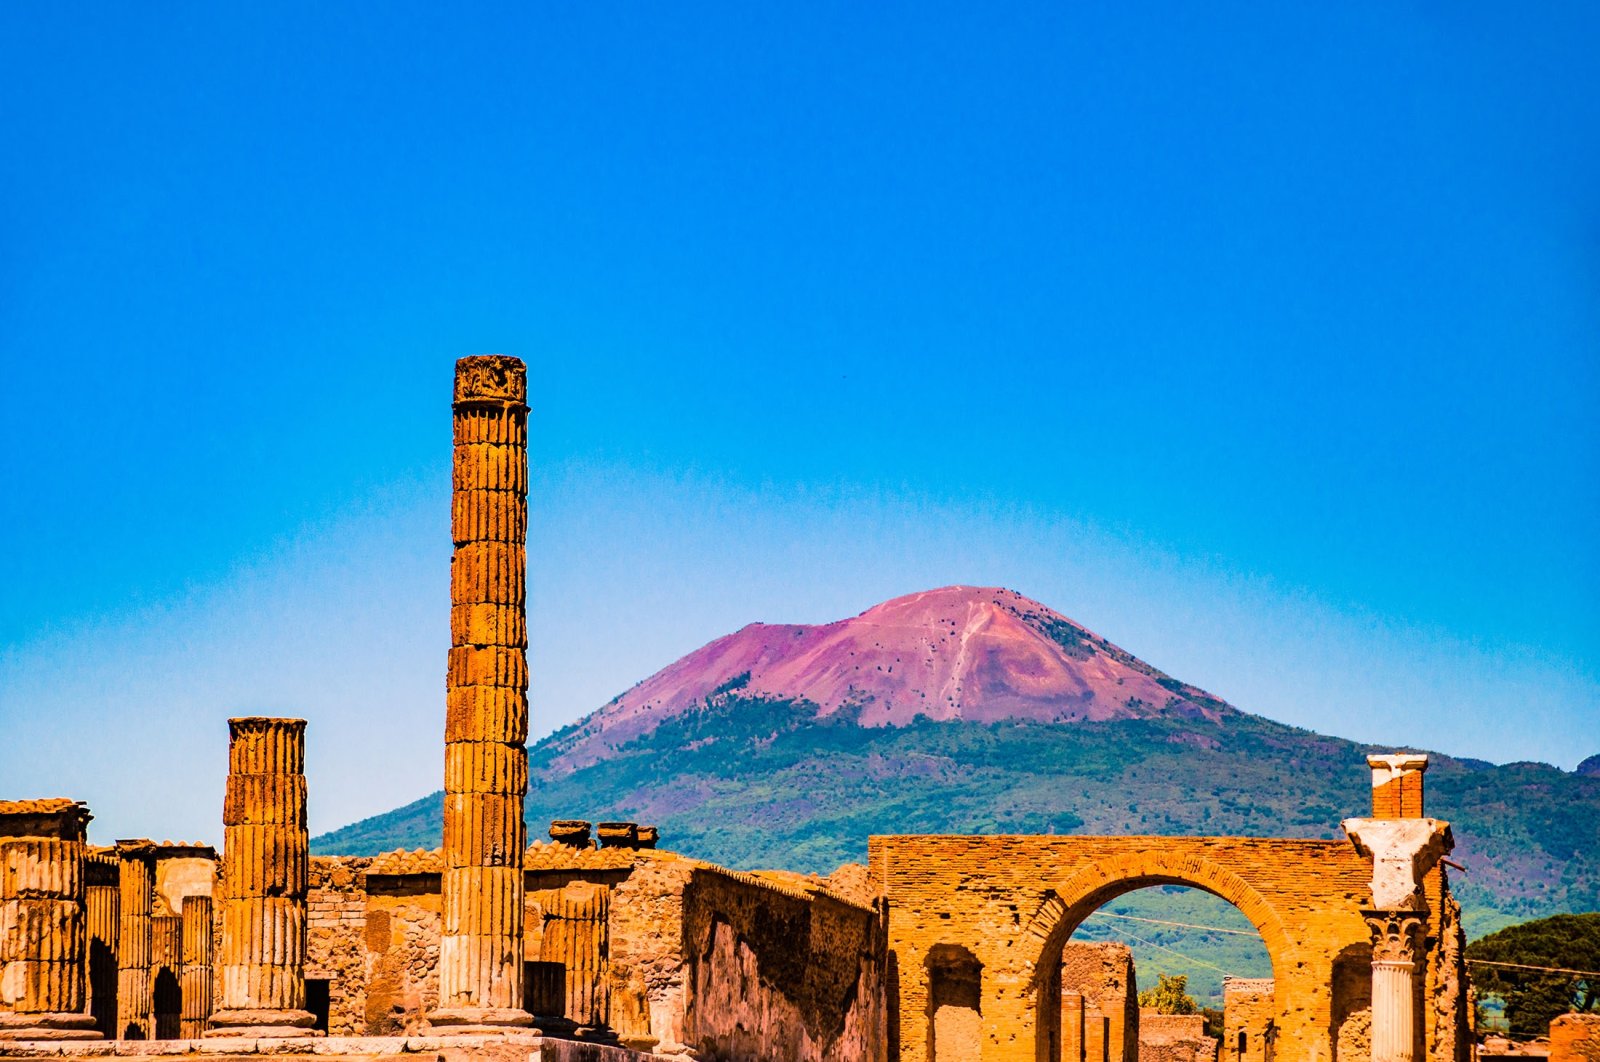 The famous antique site of Pompeii, near Naples, Italy. (Shutterstock Photo)